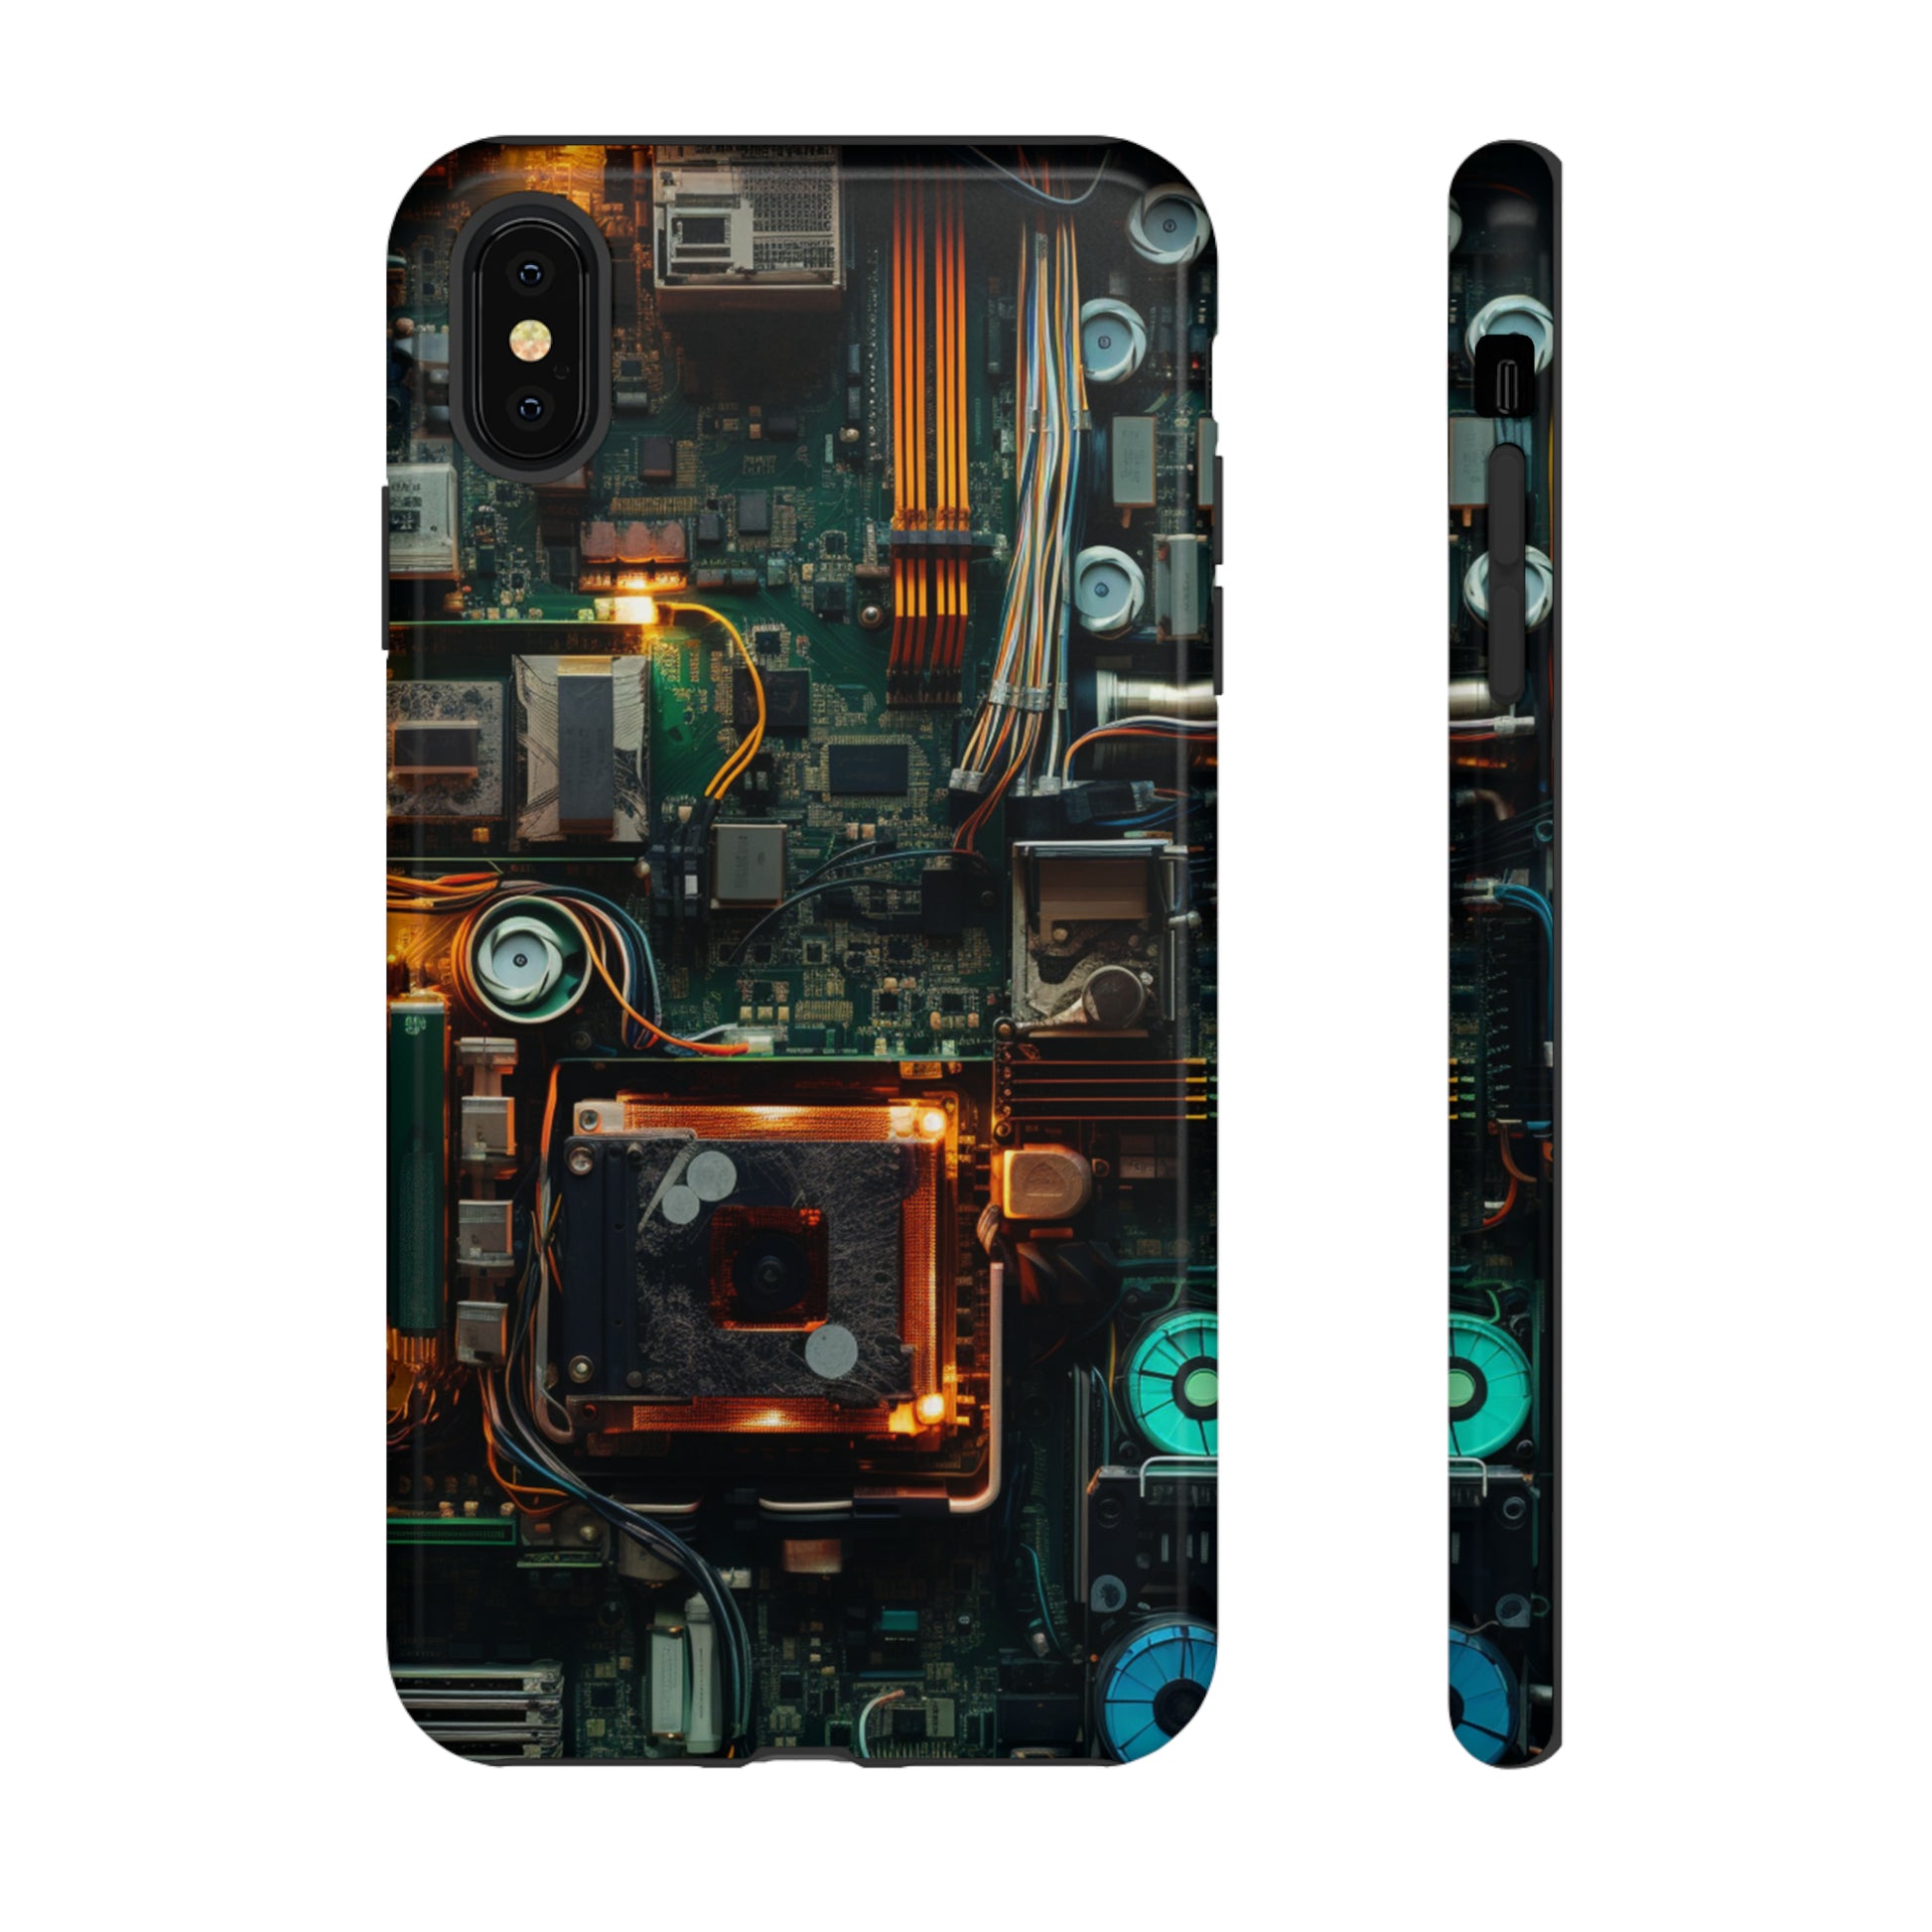 Futuristic tech-inspired phone cover for iPhone XR